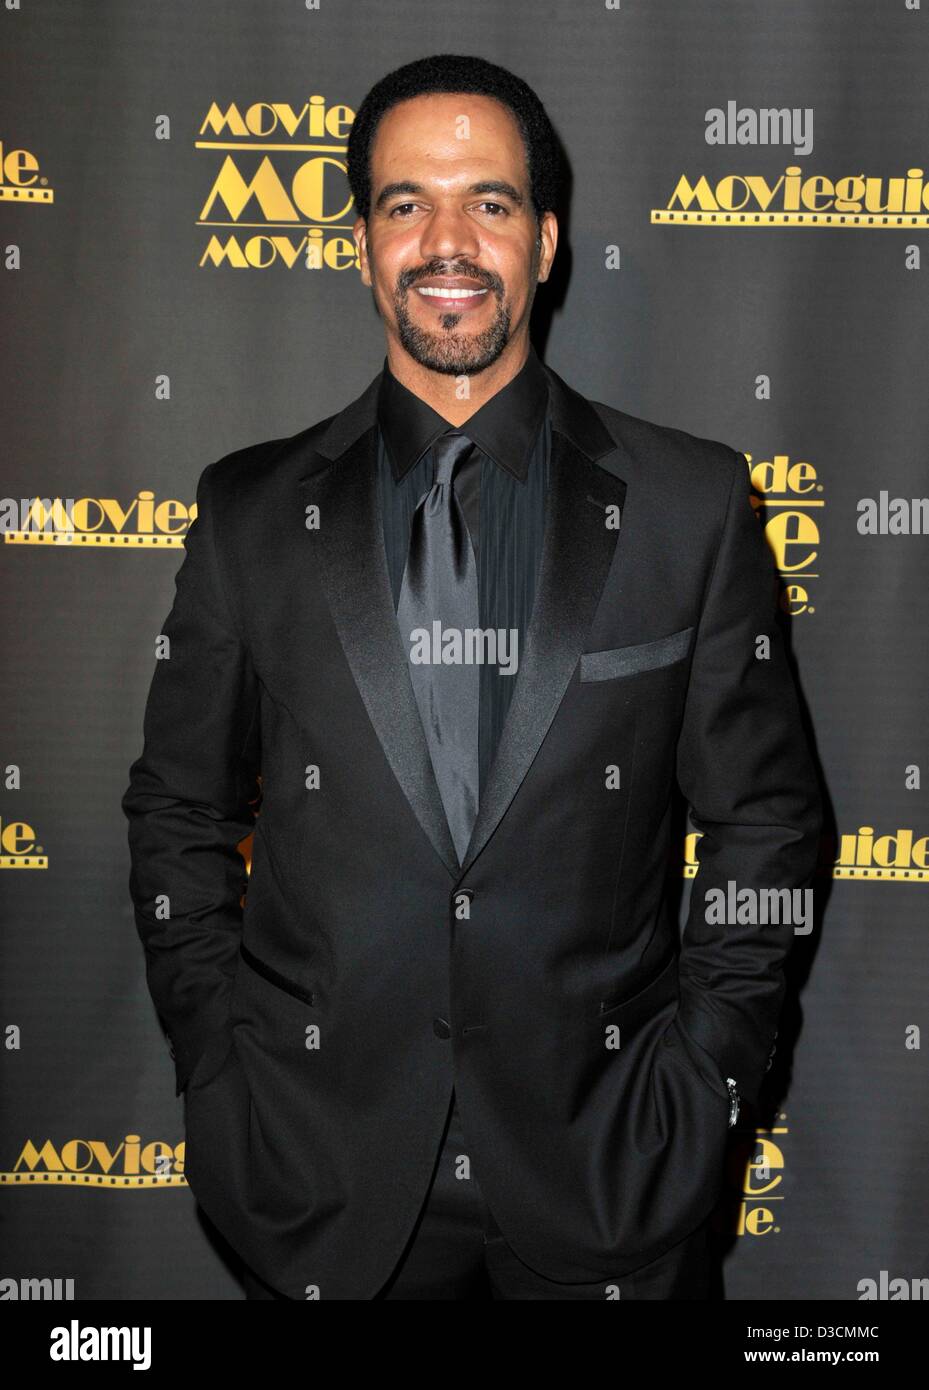 Kristoff St. John at arrivals for The 21st Annual Movieguide Awards, Universal Hilton And Towers Ballroom, Los Angeles, CA February 15, 2013. Photo By: Dee Cercone/Everett Collection Stock Photo